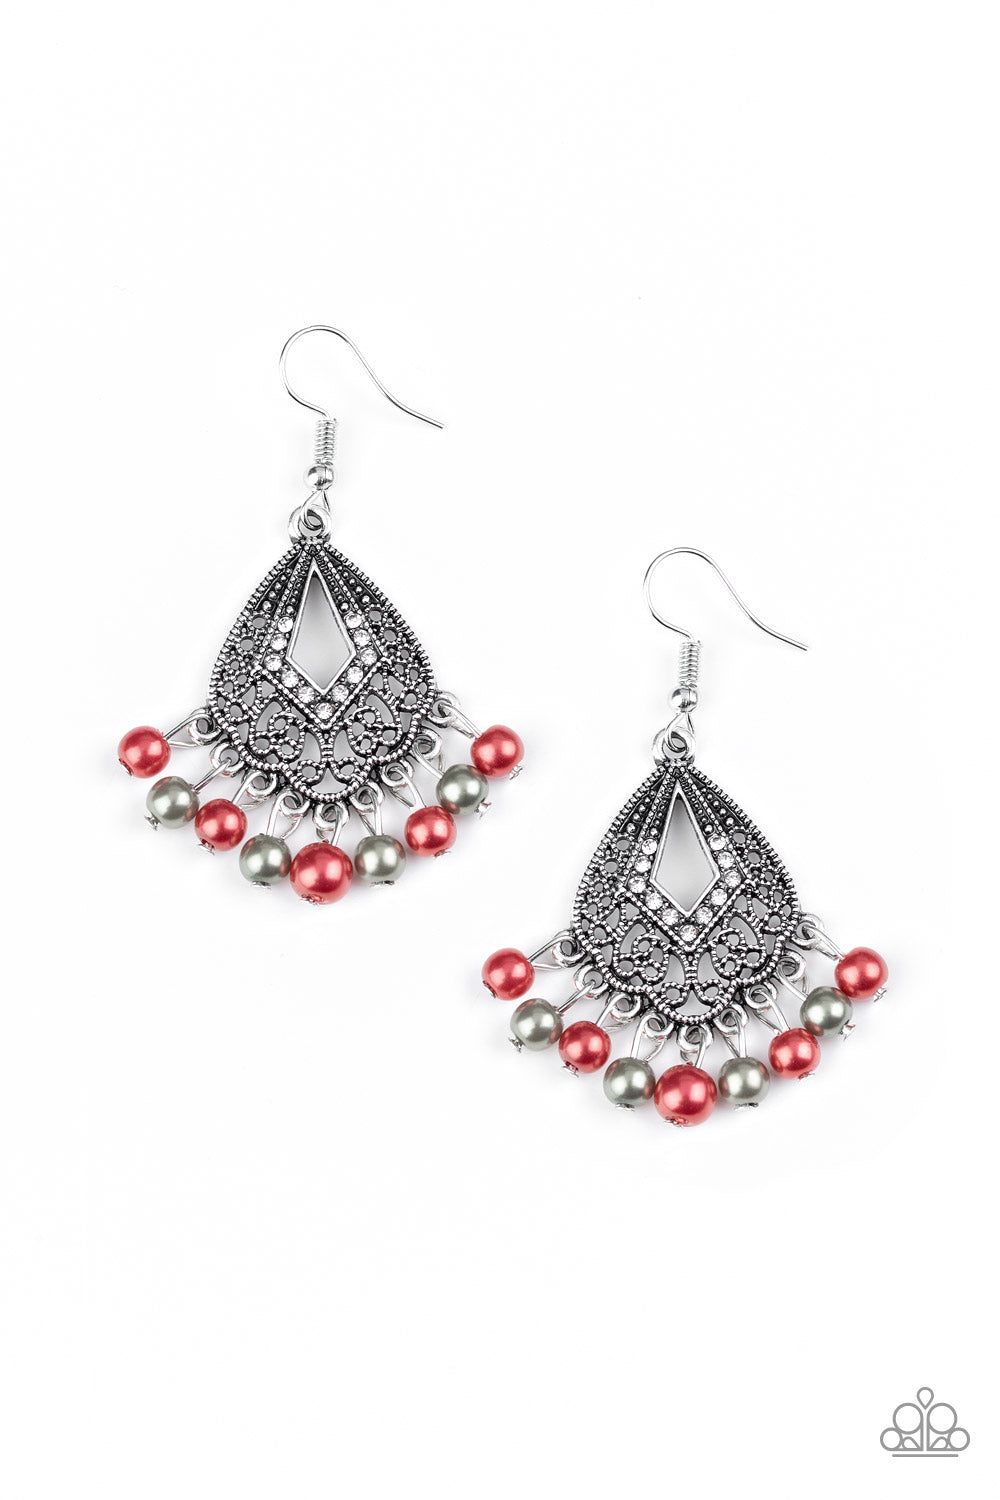 silver, silver jewelry, red, red jewelry, earrings, fish hook earrings, affordable jewelry, affordable holiday gift, everyday jewelry,trending jewelry, viral jewelry, paparazzi accessories, jewelry stores, jewelry stores near me, casual jewelry, prom jewelry, wedding jewelry, 